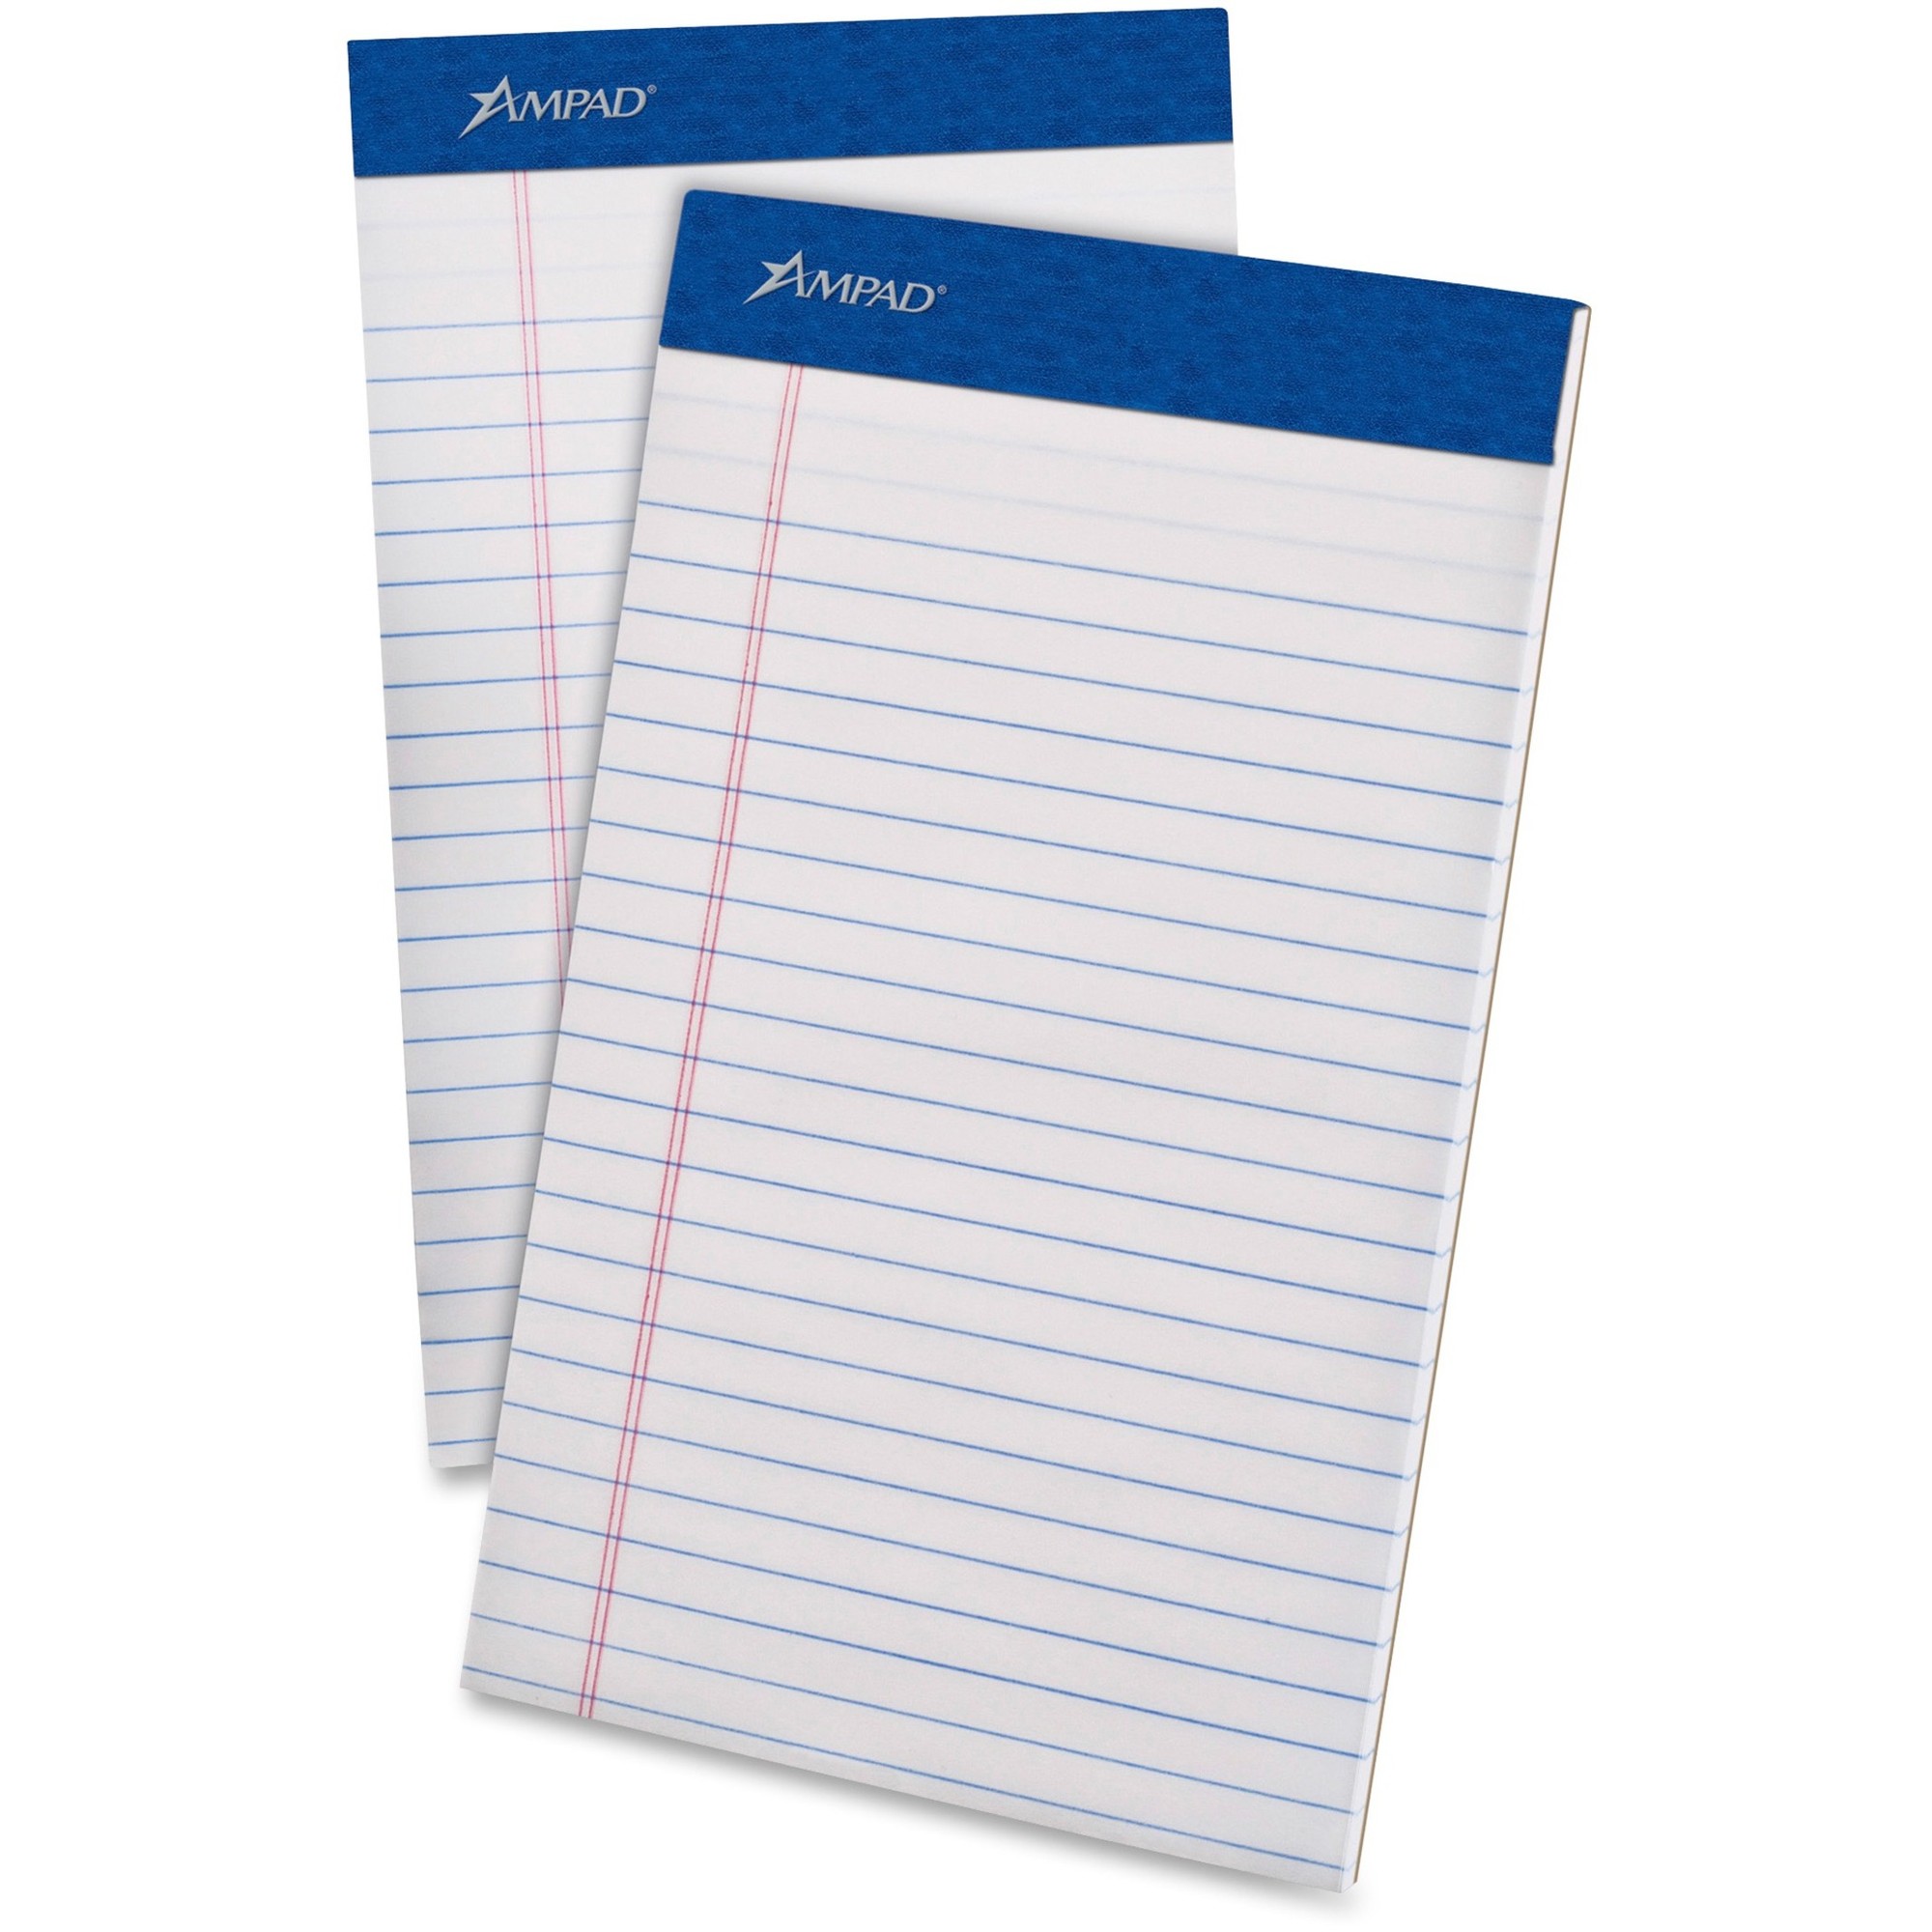 Ampad Perforated Ruled Pads - 50 Sheets - Stapled - 0.28" Ruled - 20 lb Basis Weight - 5" x 8" - White Paper - White Cover - Stu